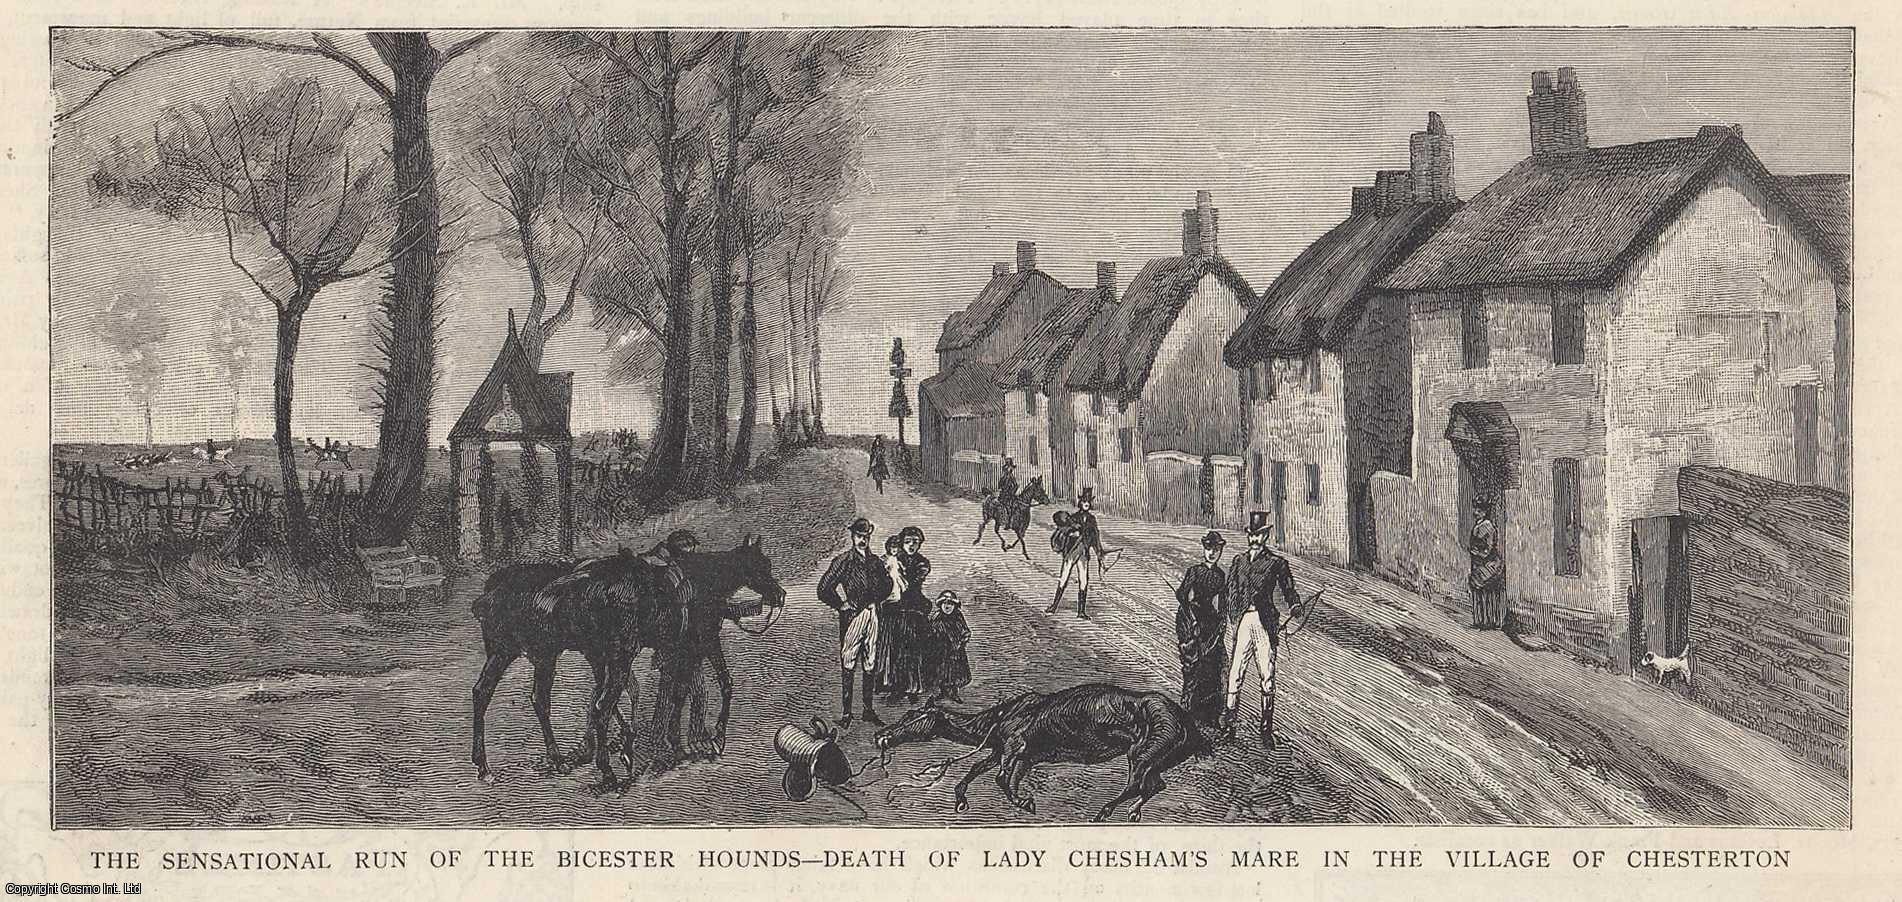 Hunting - The Sensational Run of the Bicester Hounds. Death of Lady Chesham's Mare in the Village of Chesterton. An original print from the Graphic Illustrated Weekly Magazine, 1885.